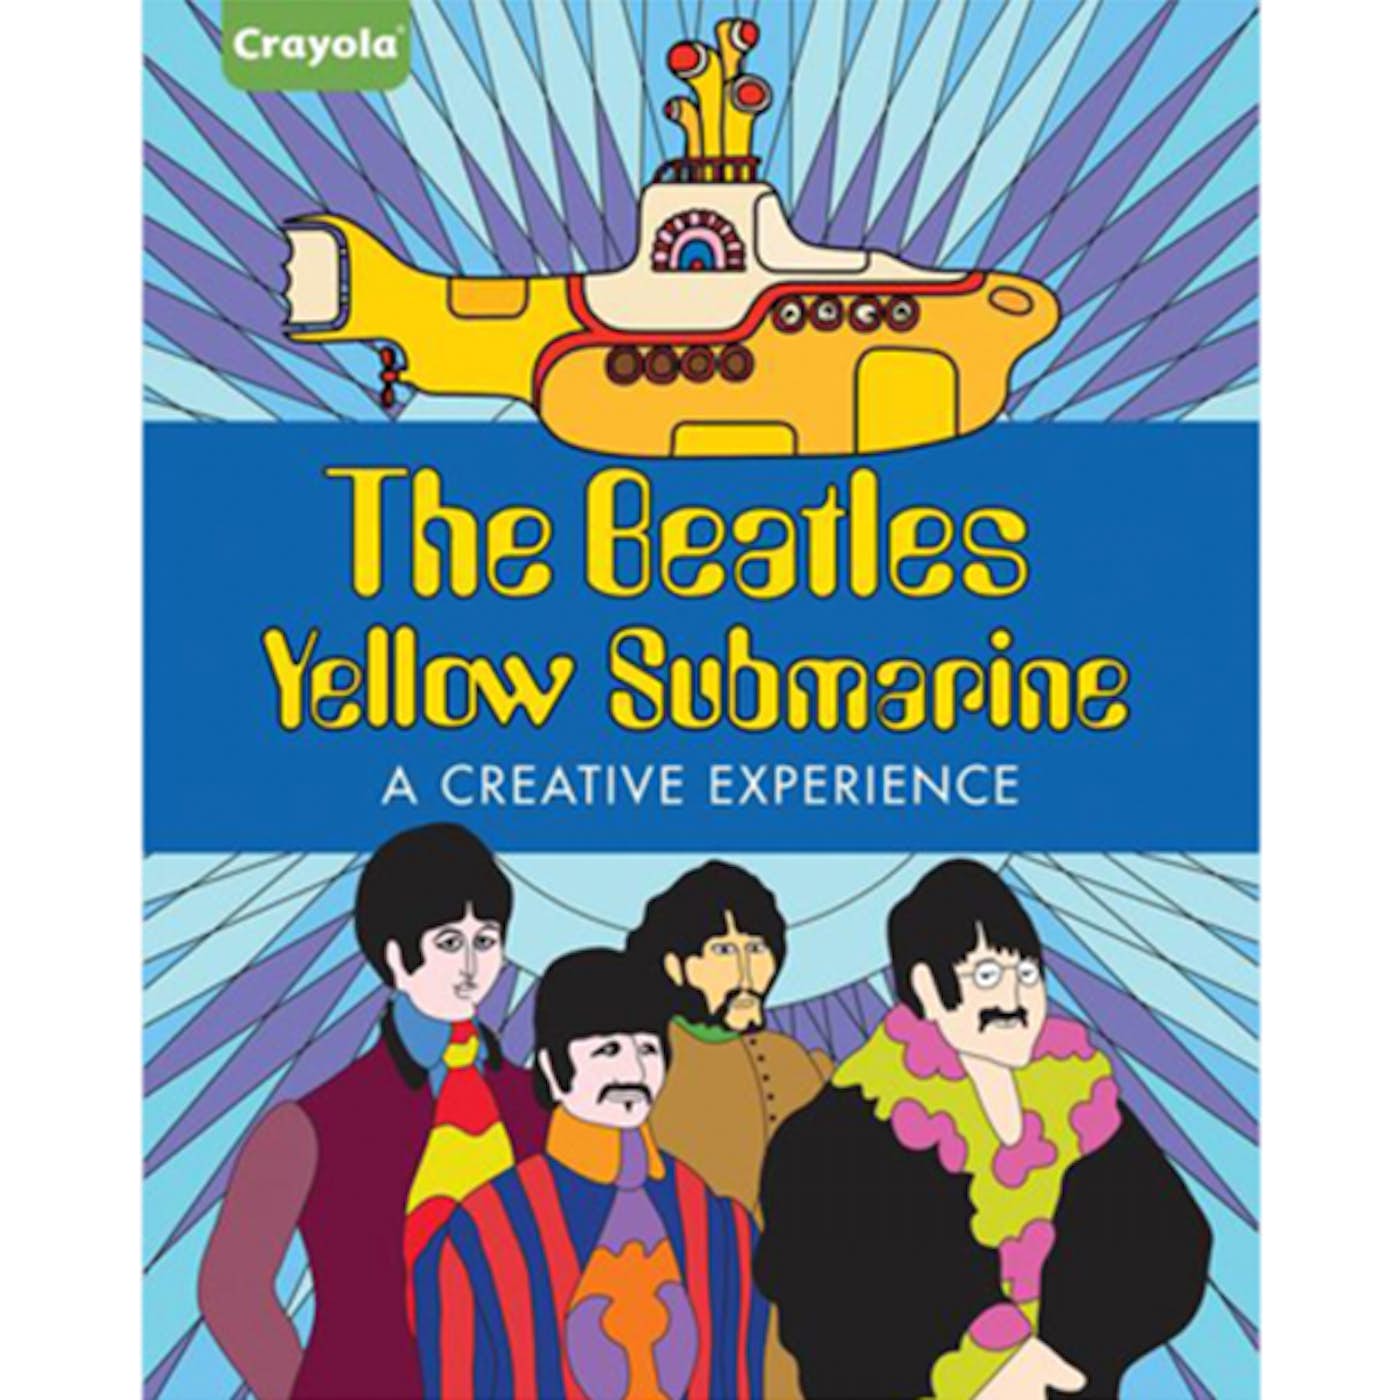 The beatles yellow submarine a creative experience coloring book